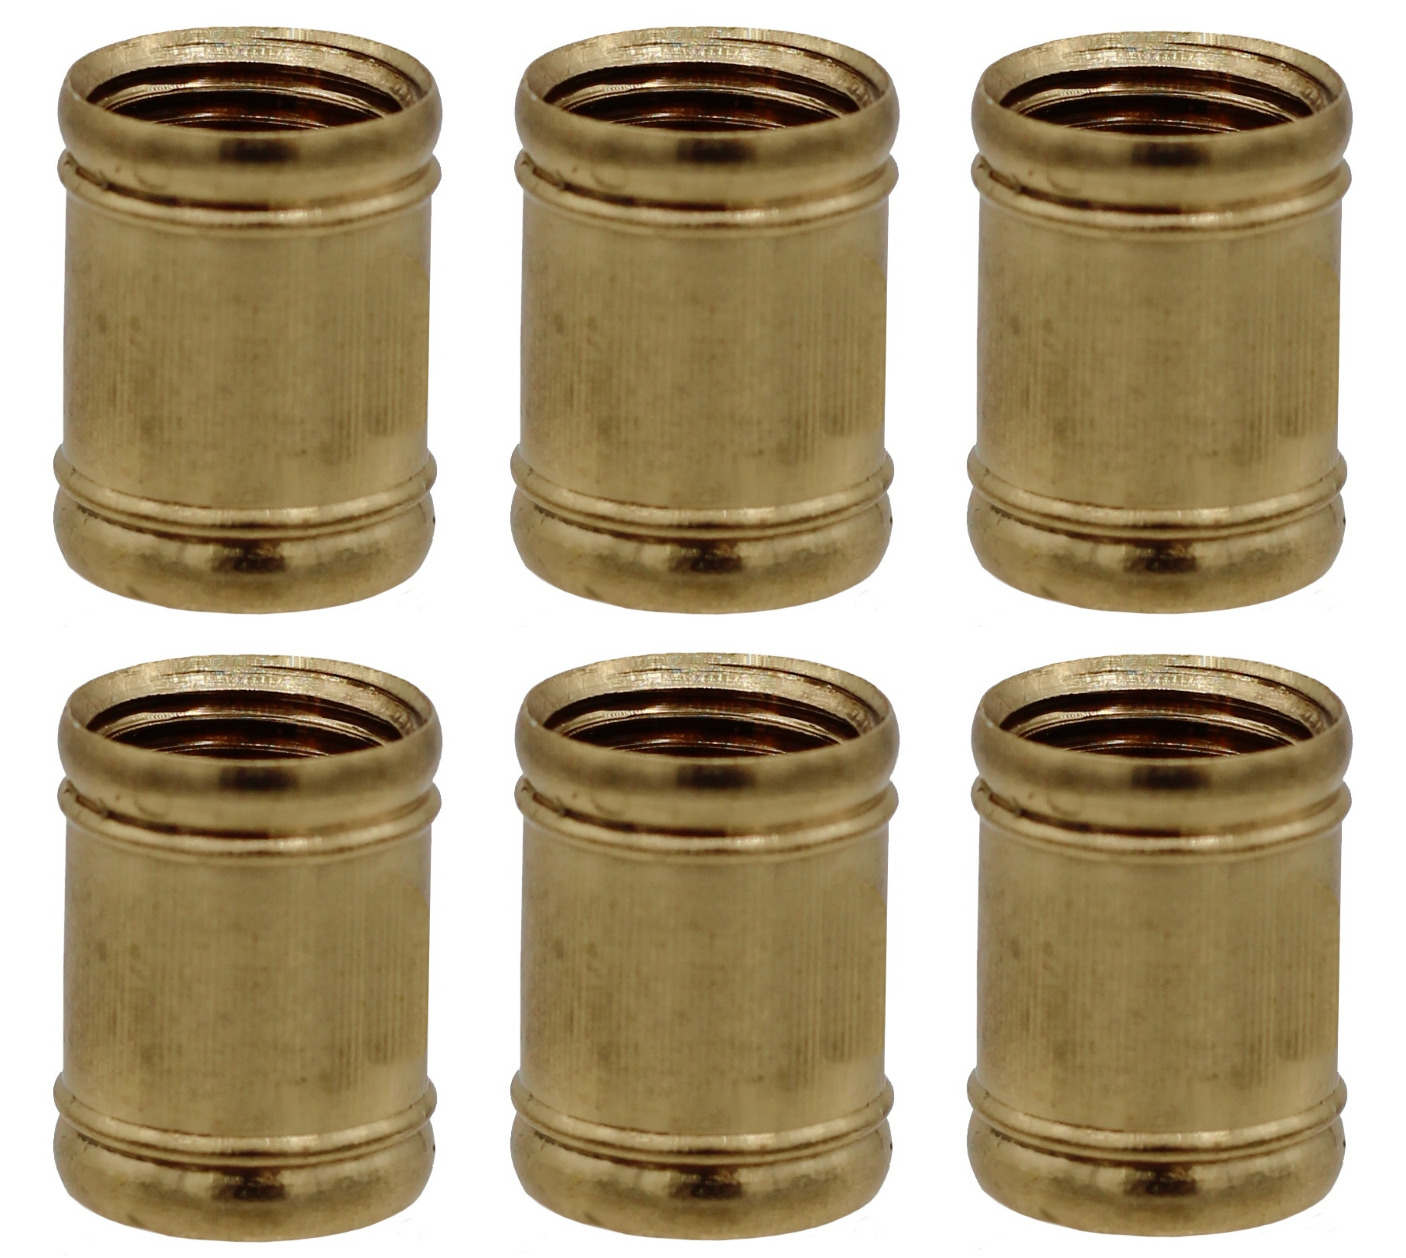  Creative Hobbies Brass Coupling 1/2 Inch Long 1/8 IP for Lamps - Pack of 6